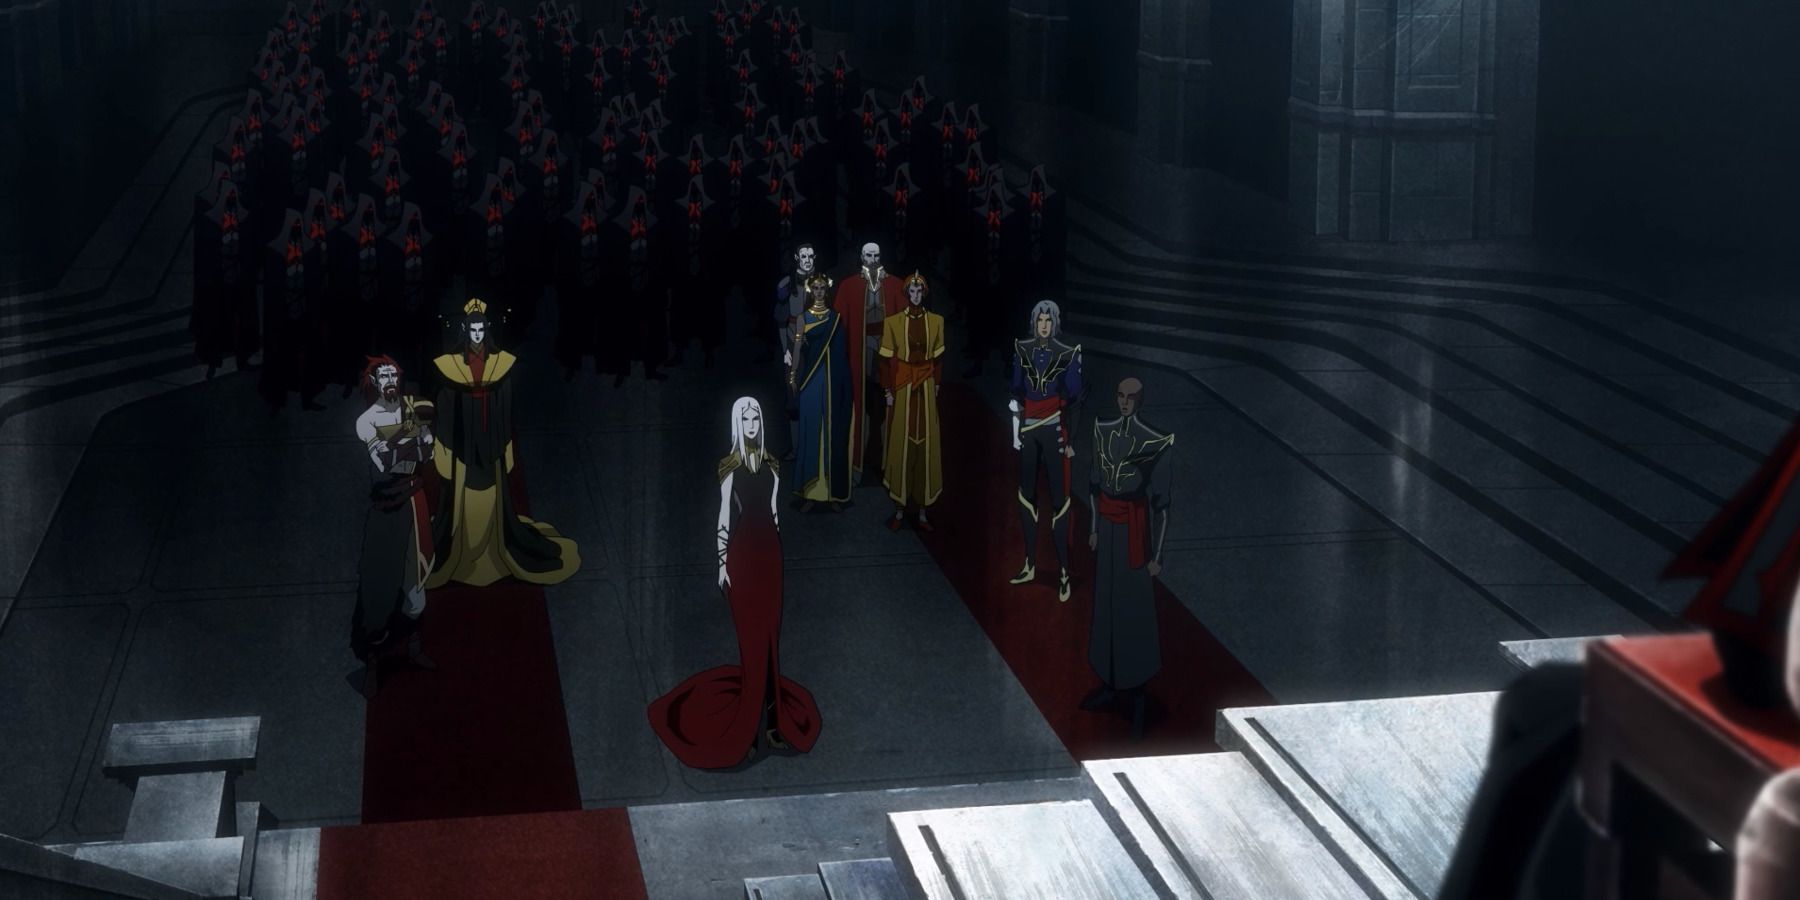 Castlevania Netflix Dracula's Army and Generals standing before his throne